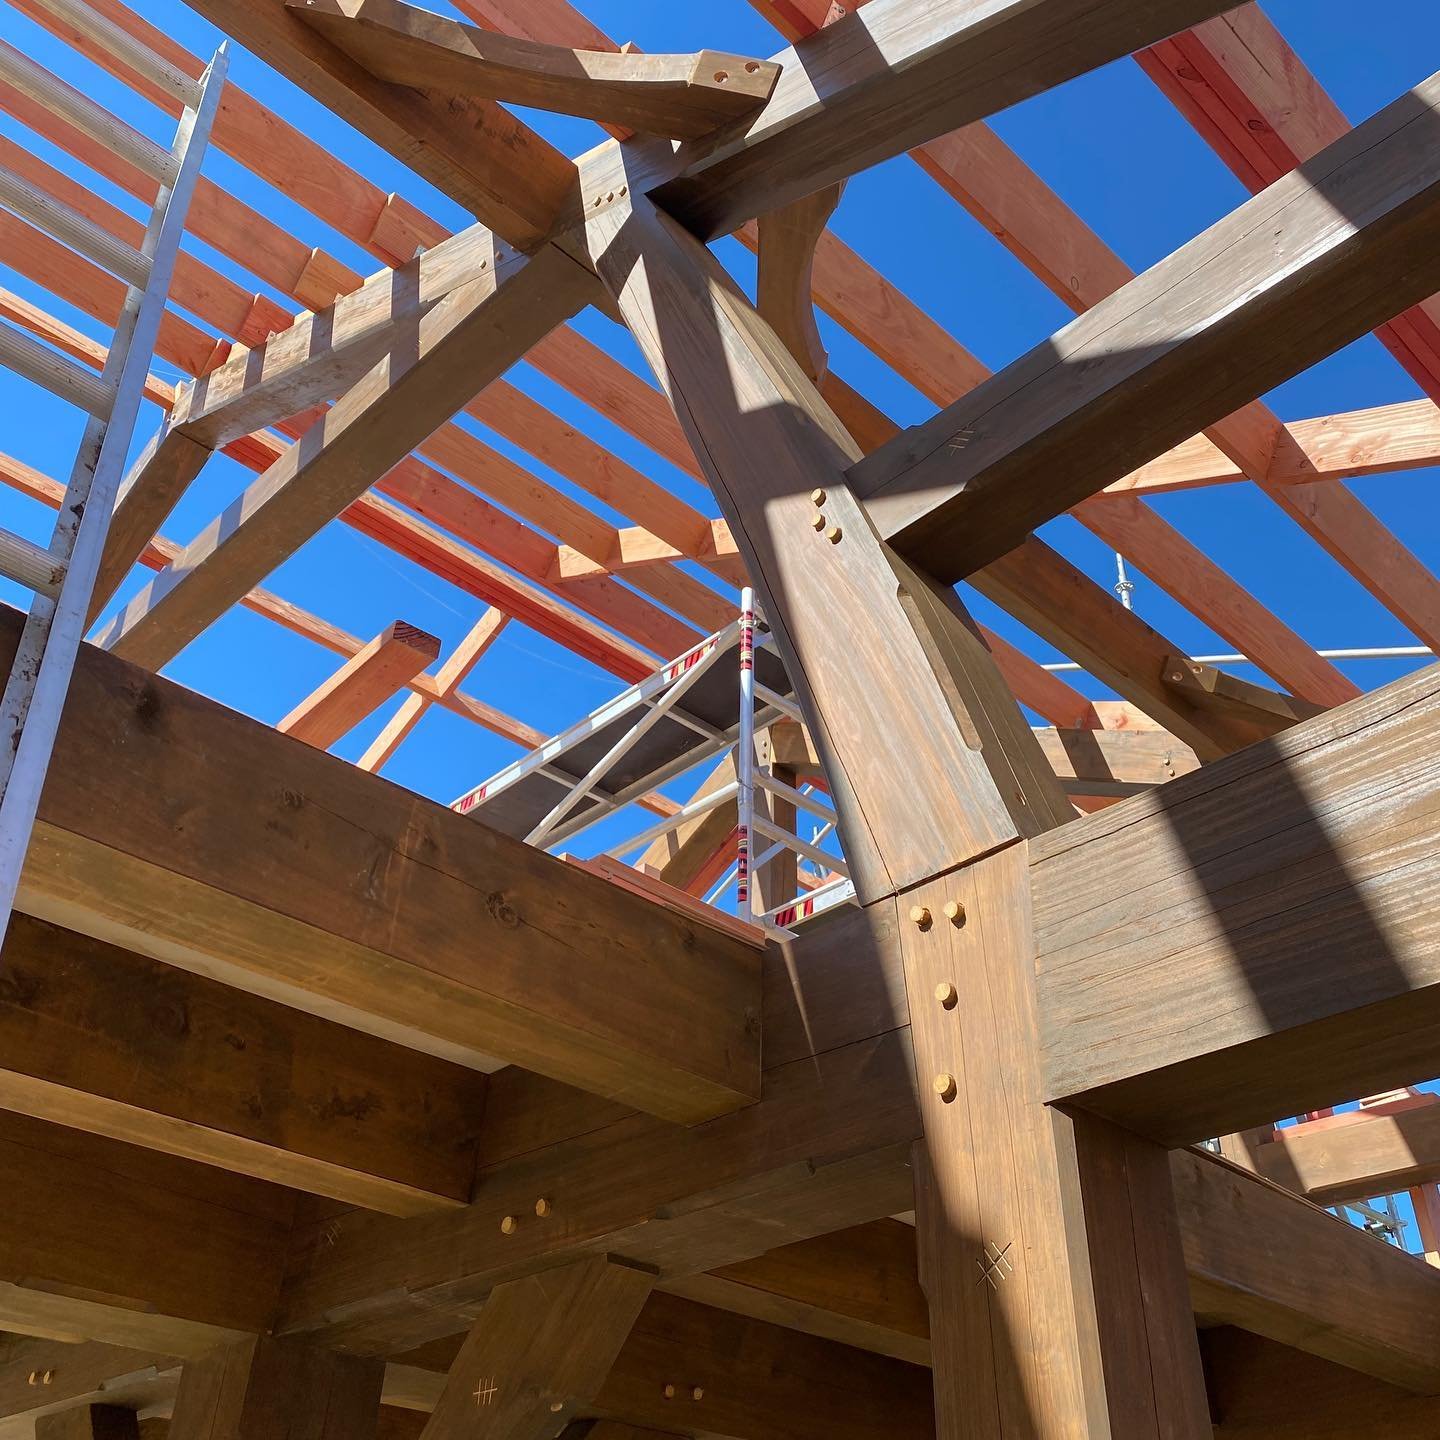 The traditional timber construction methods being used on our Takaka Co-housing project by the team @elemental.build 

#timberconstruction #nzarchitecture #nzarchitects #cohousing